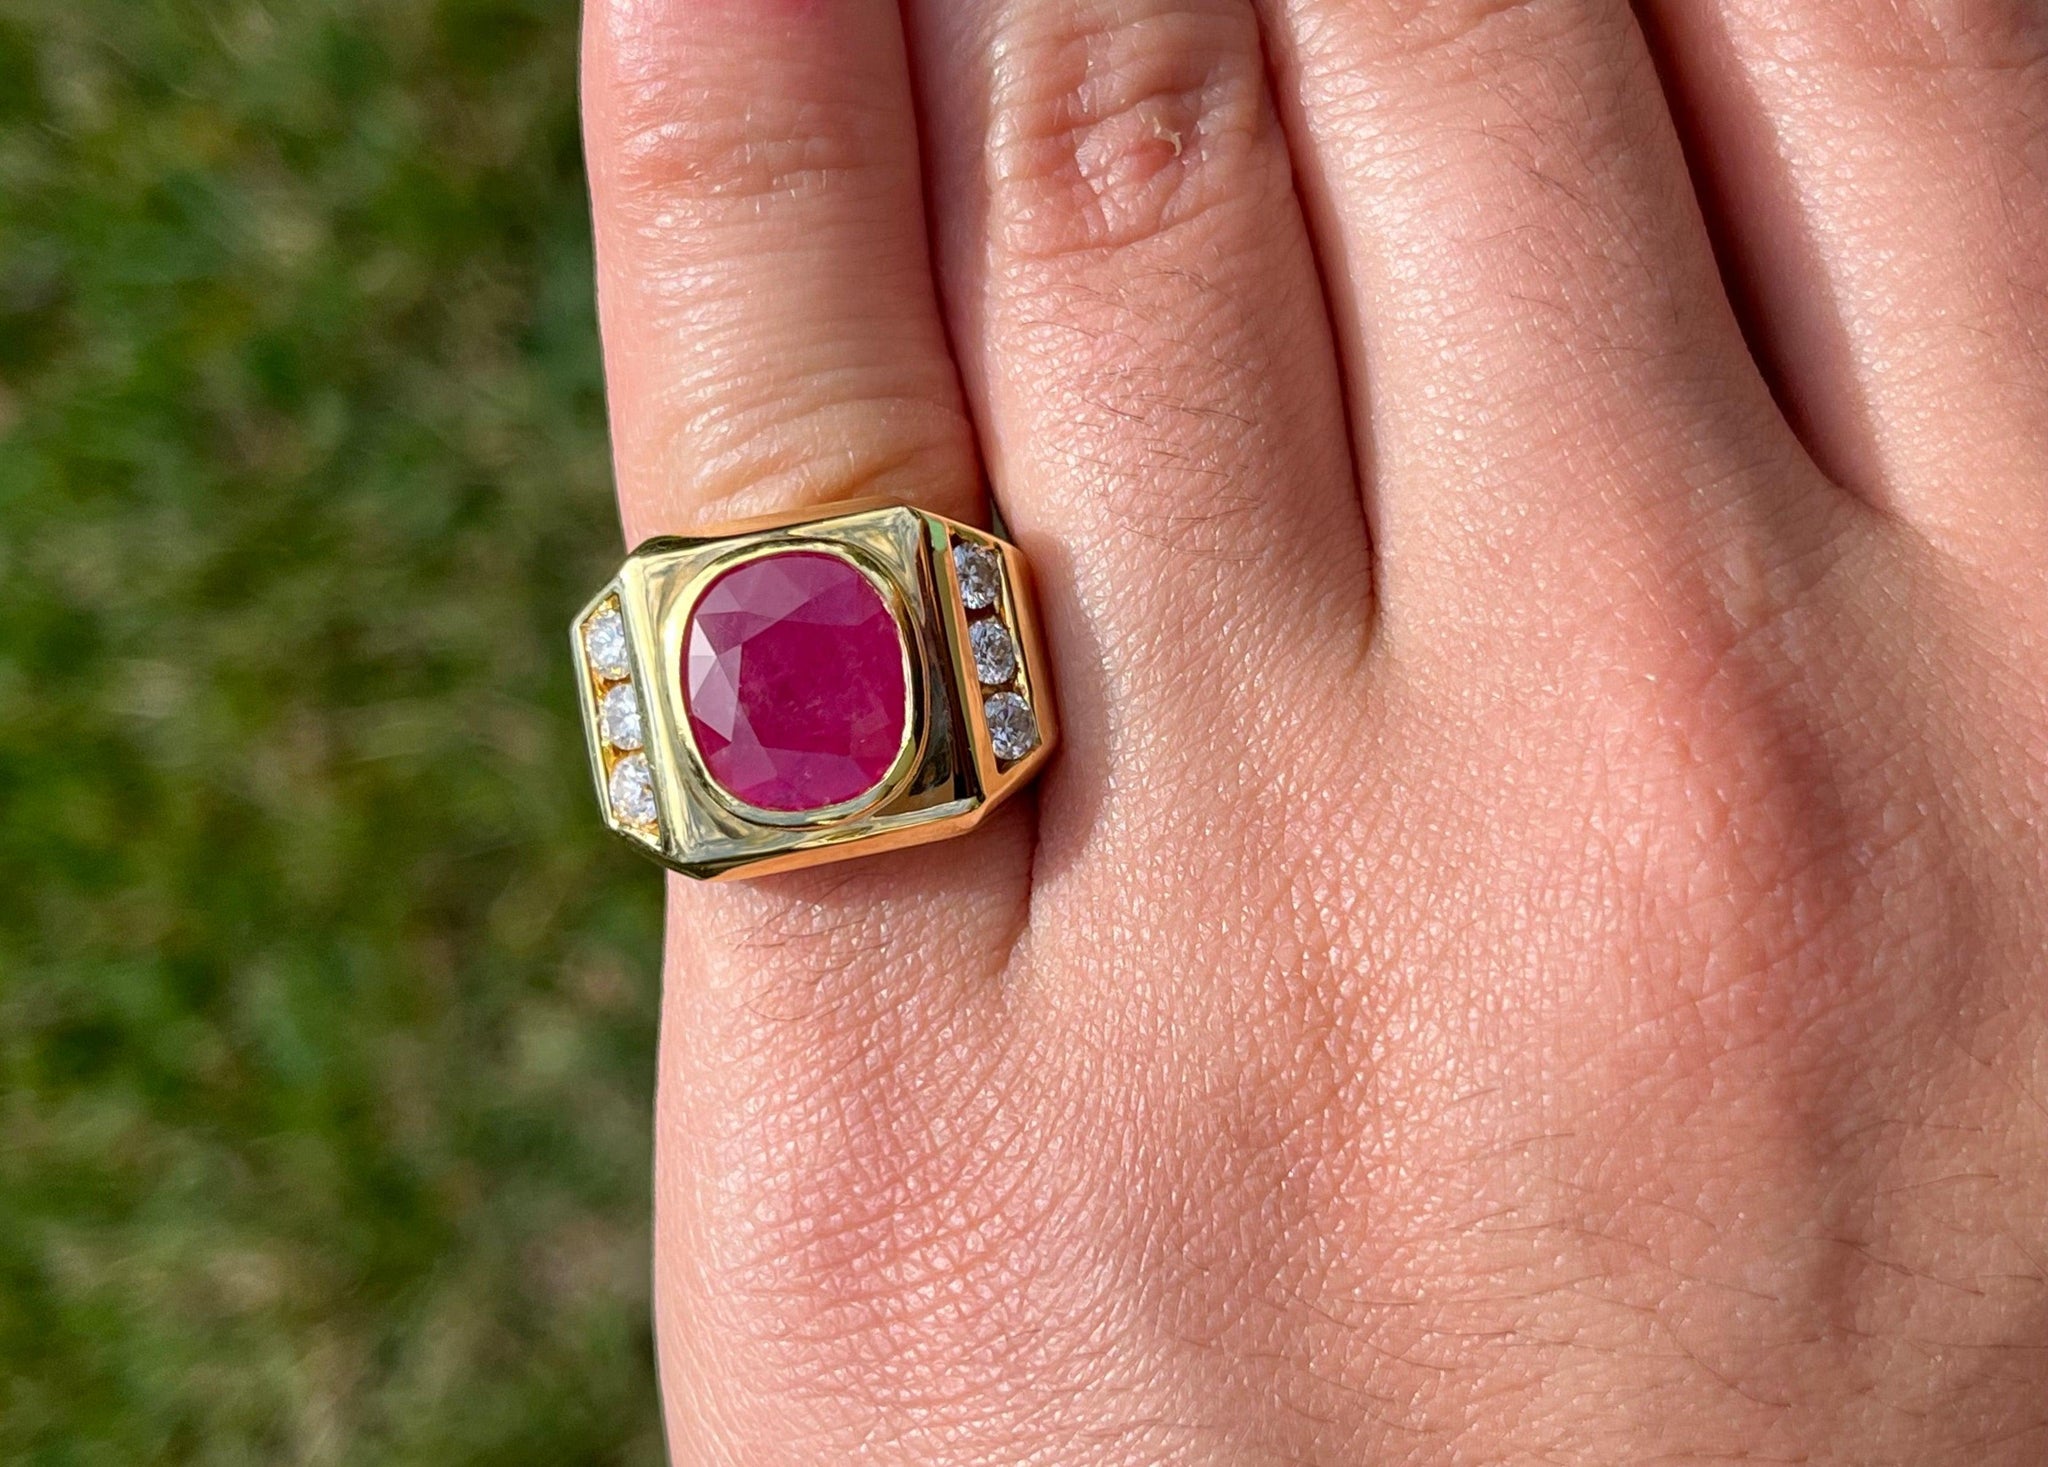 The Vivacious Ruby Gold Ring